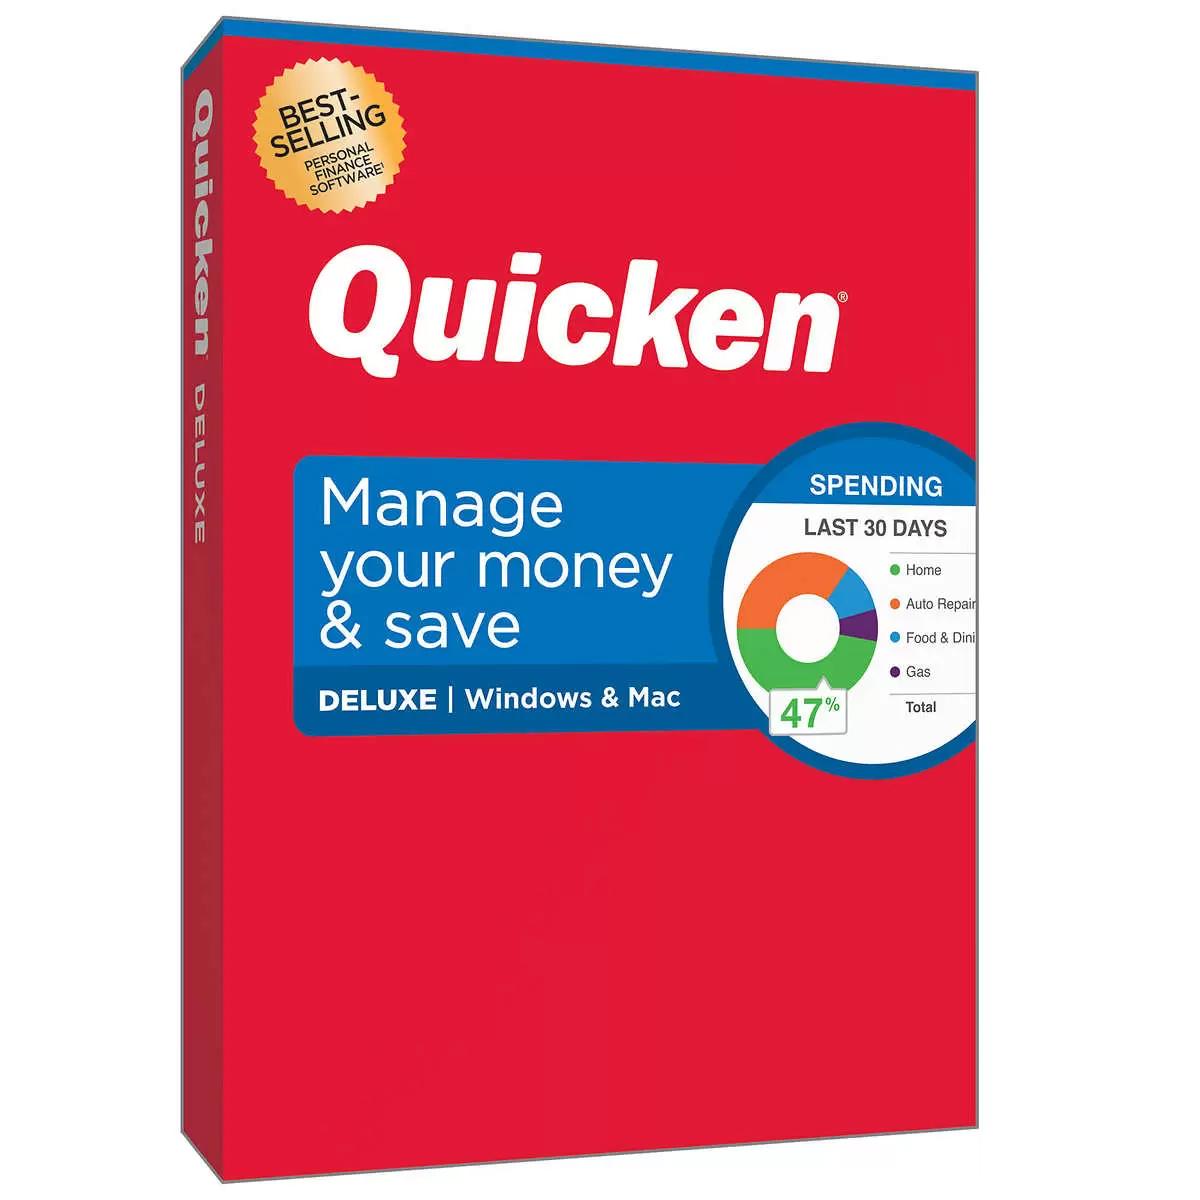 Quicken Finance Management Subscriptions for $26.98 Shipped